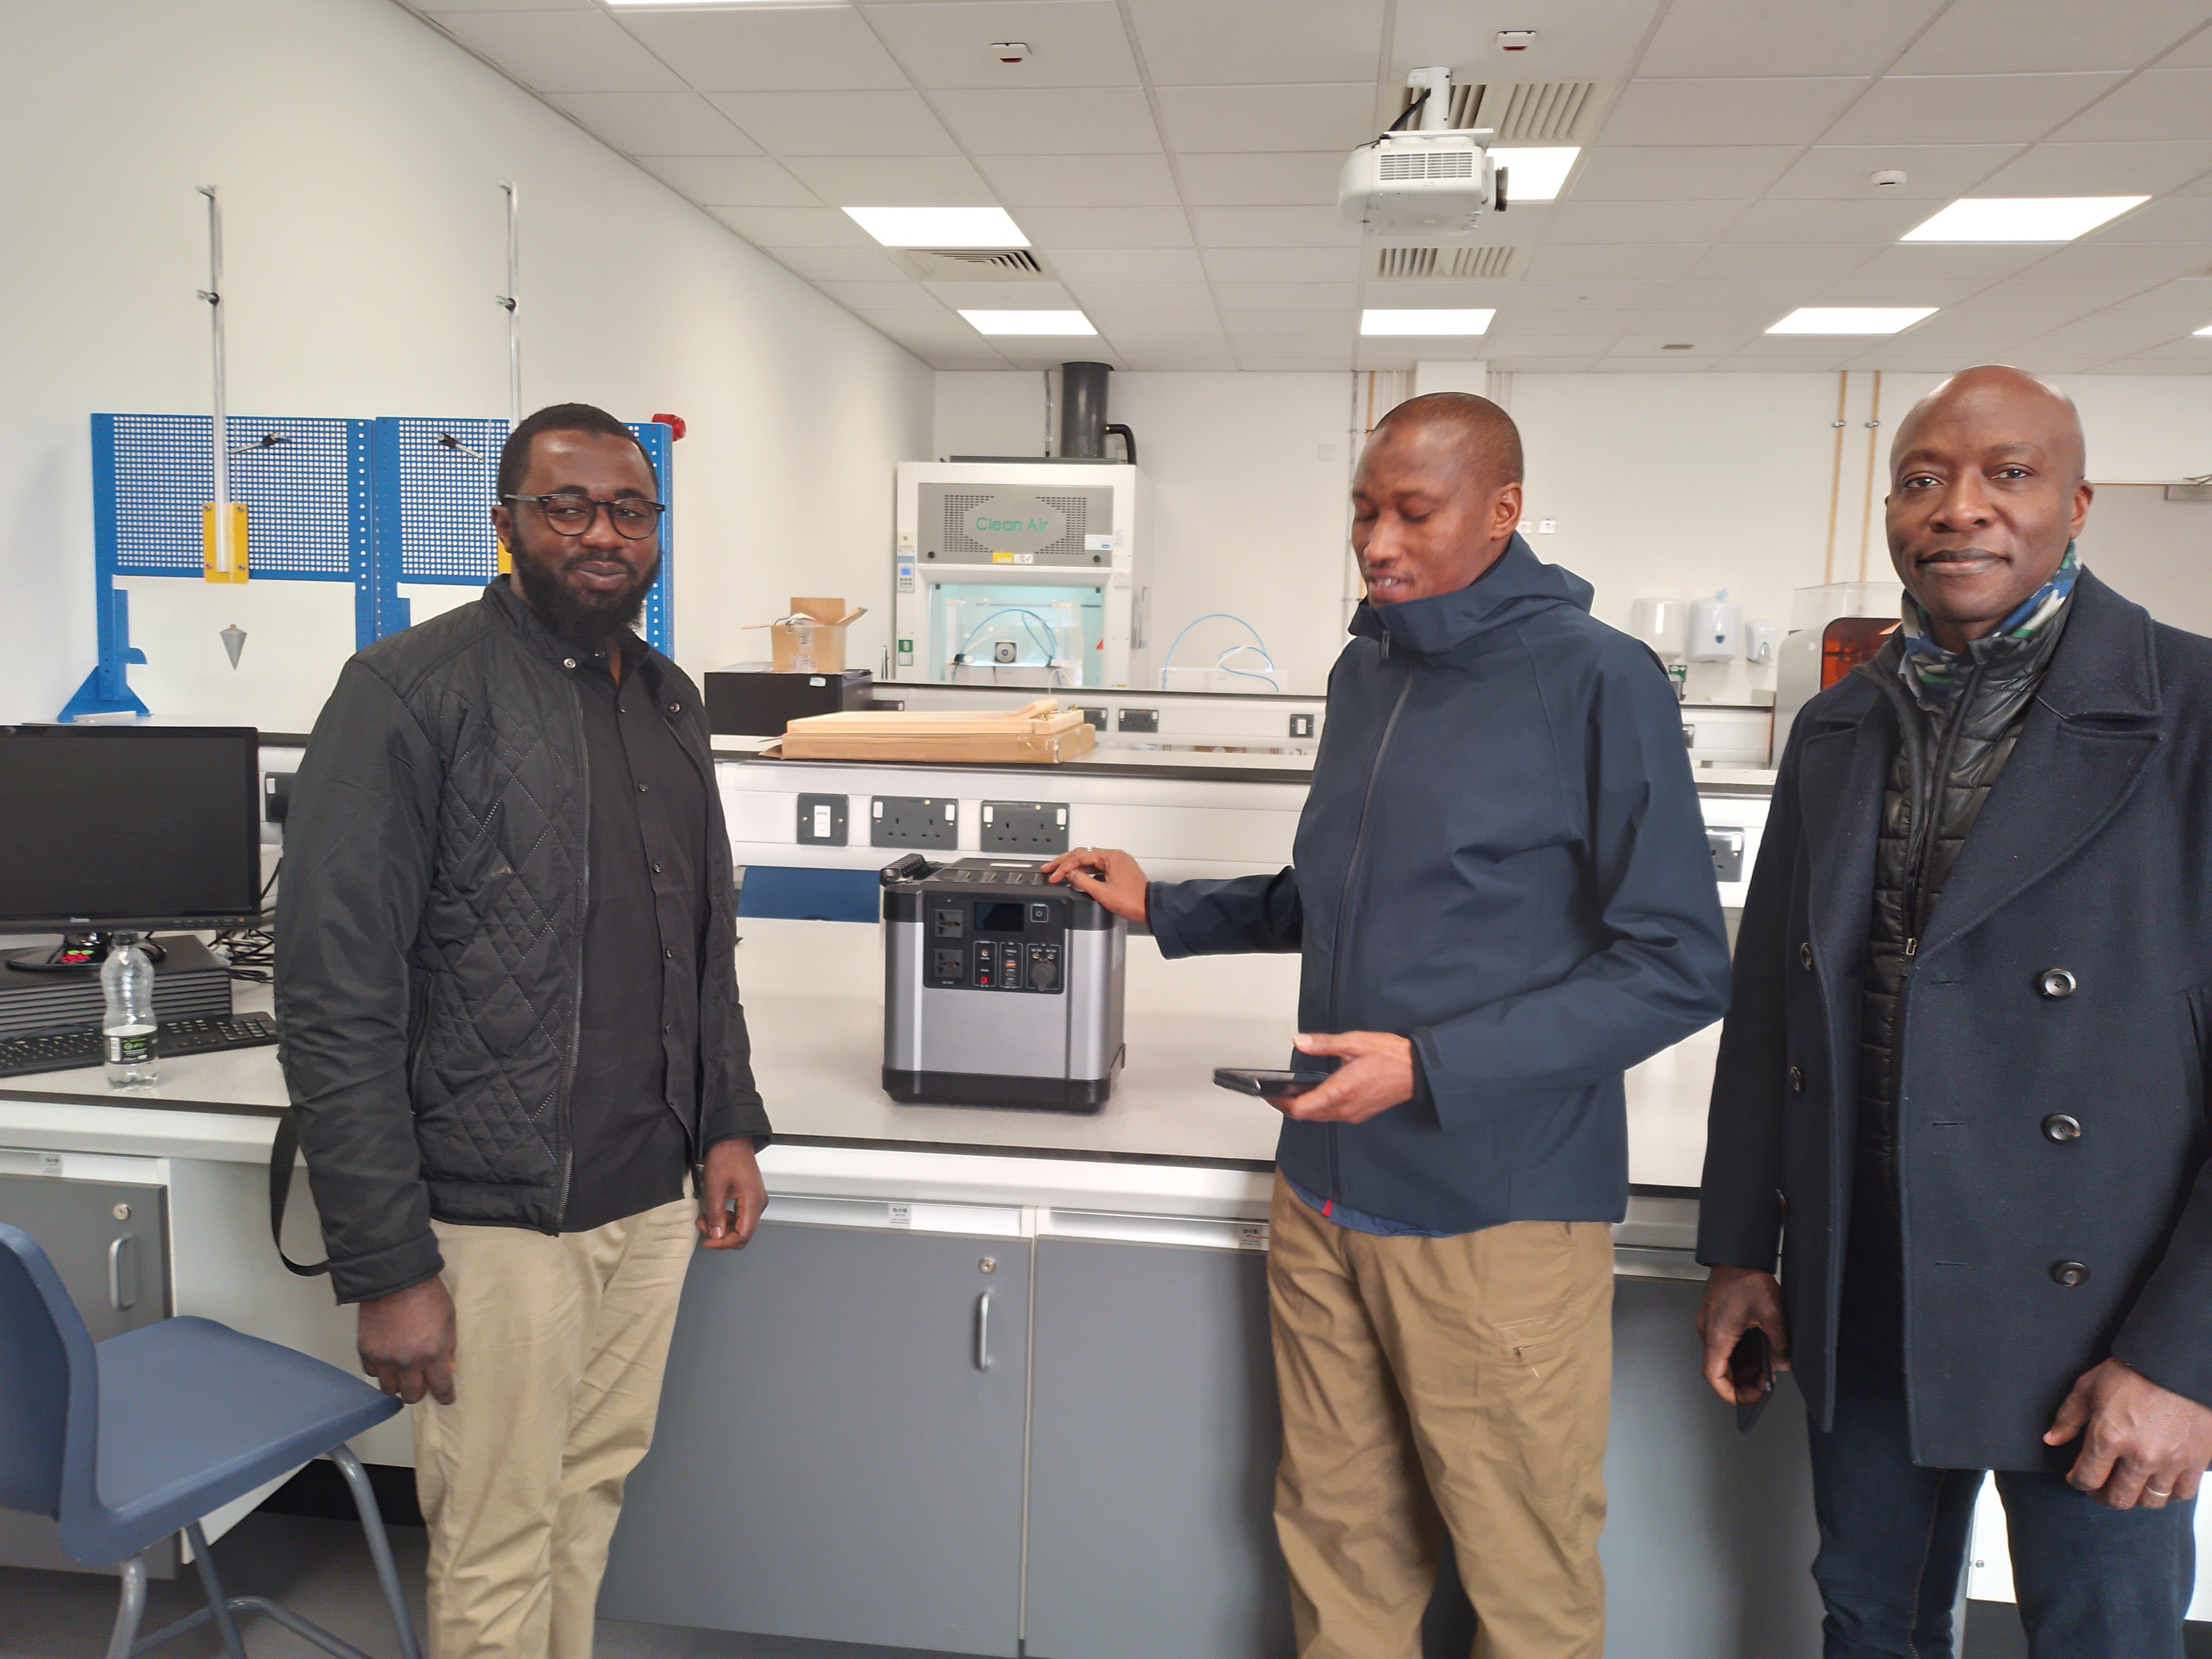 It was a great pleasure to welcome to our R&D facility at the University of Lincoln, the Nigerian High Commissioner Mohammed Sadiq for Investment, High Commissioner, Yakubu Adamu for Finance